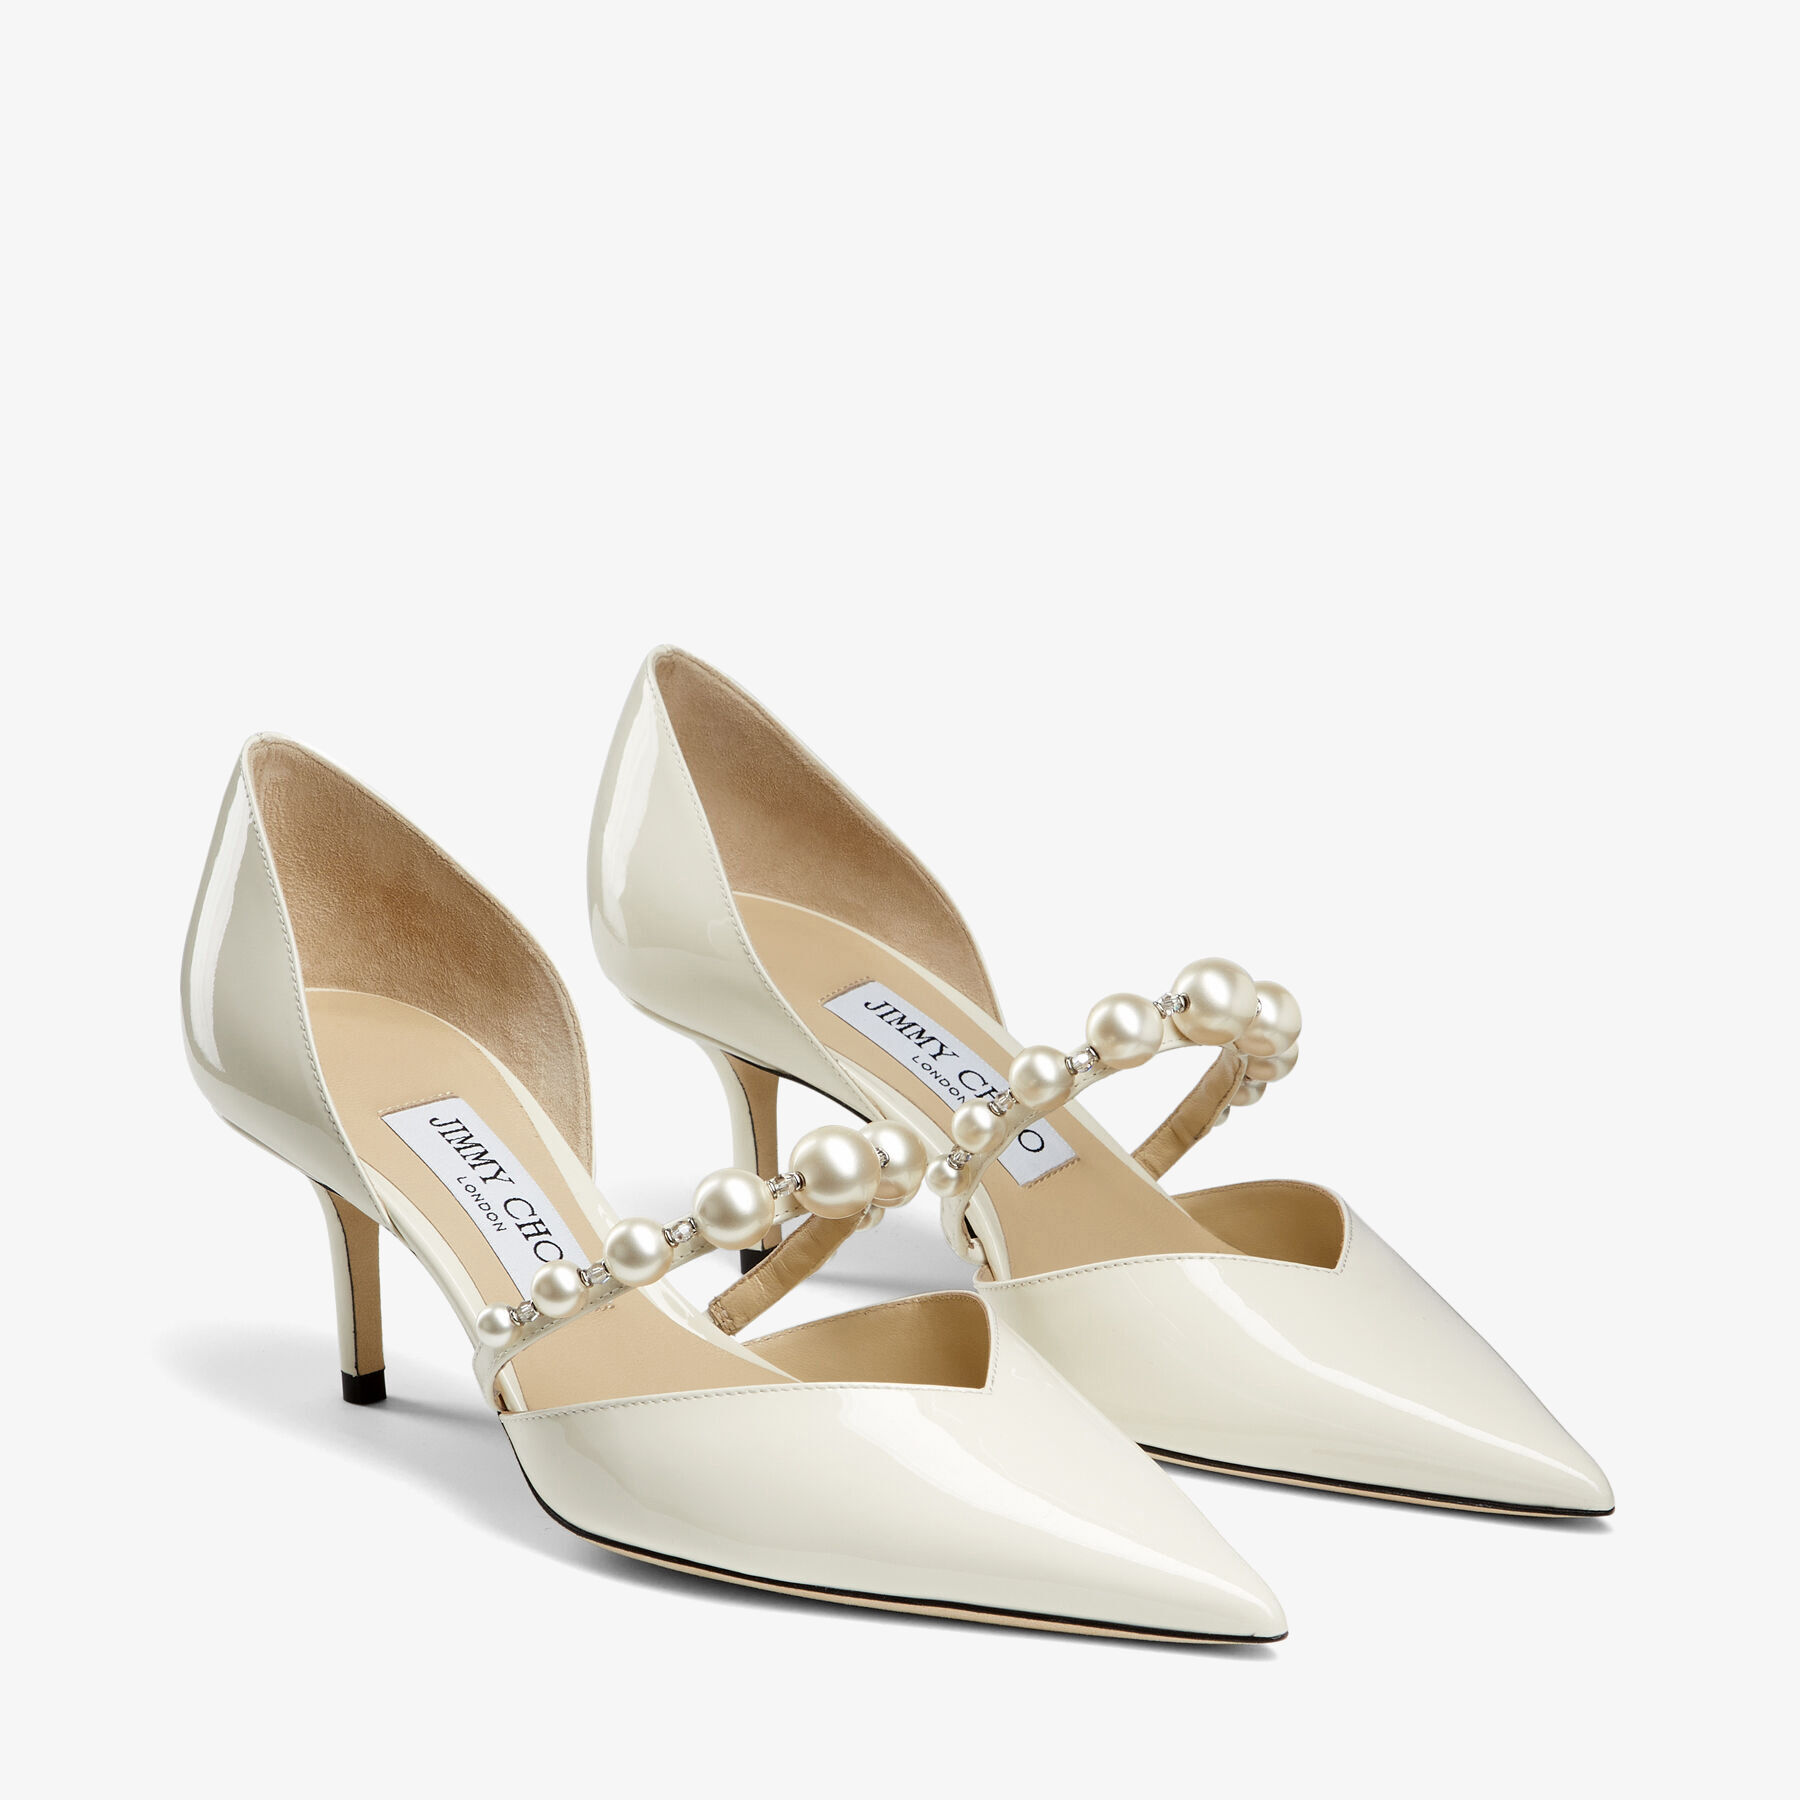 Latte Patent Leather Pointed Pumps with Pearl Embellishment 